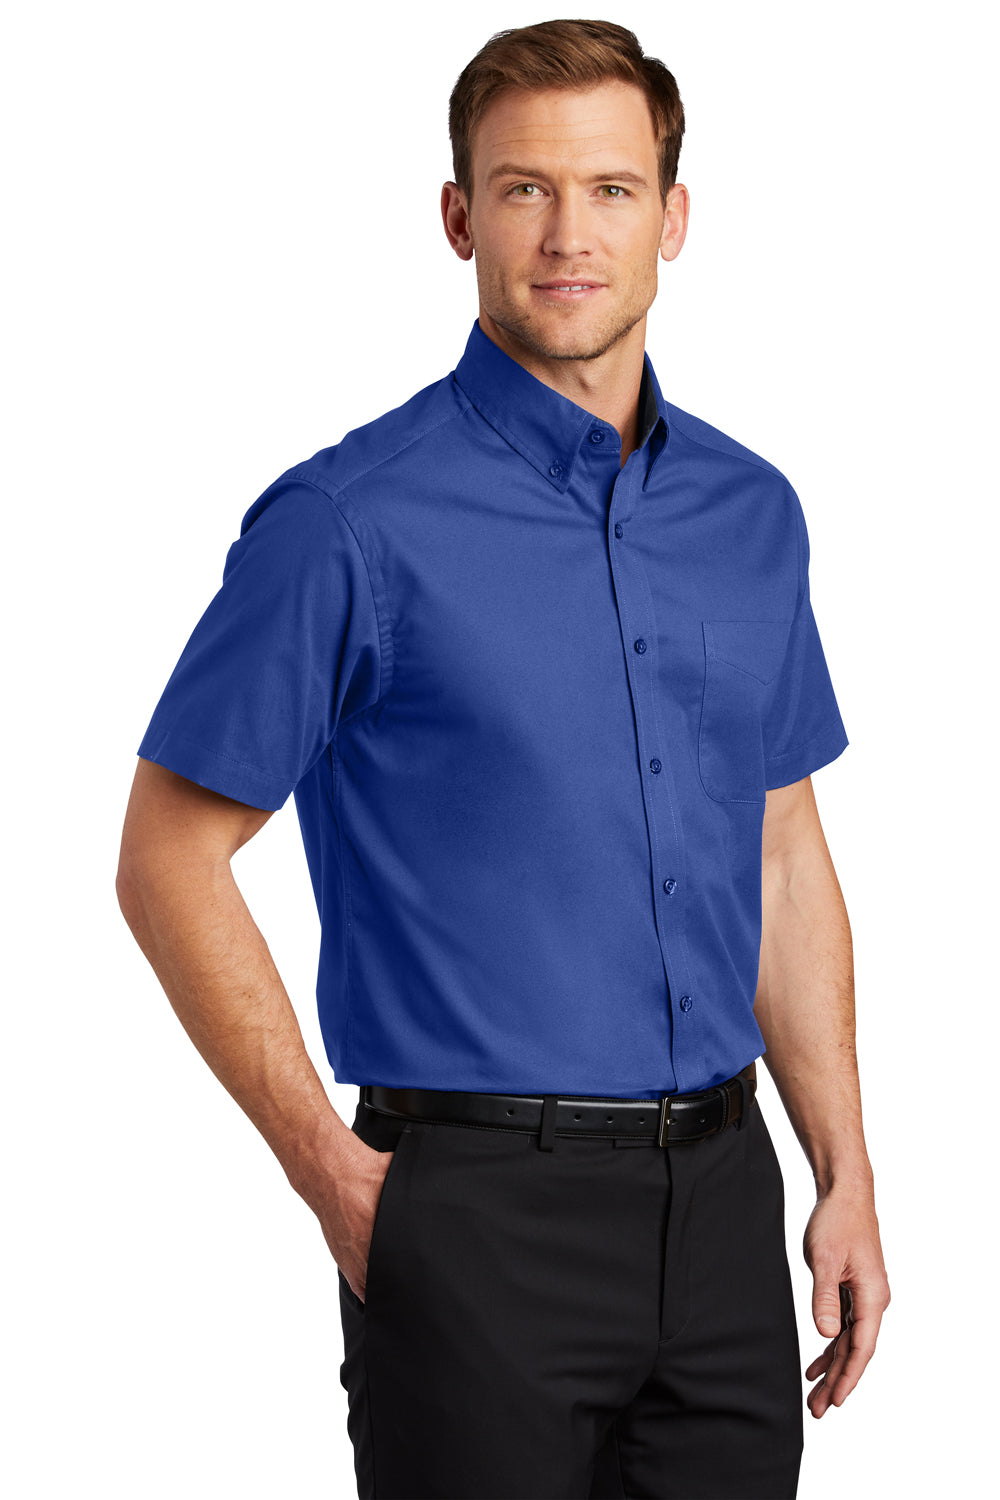 Port Authority S508/TLS508 Mens Easy Care Wrinkle Resistant Short Sleeve Button Down Shirt w/ Pocket Royal Blue 3Q